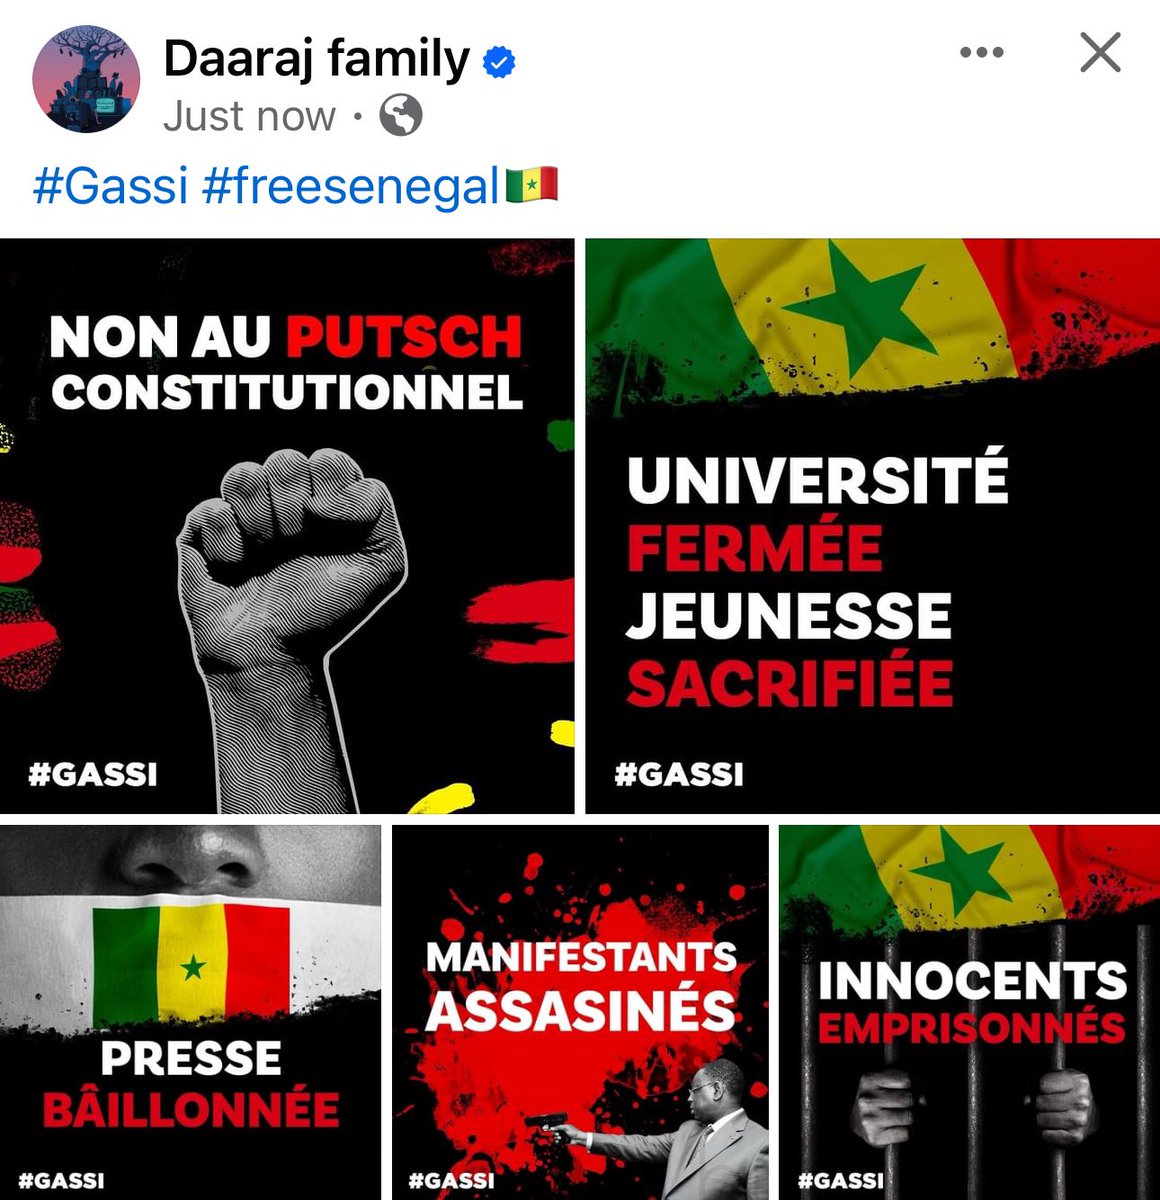 @daarajfamily
Thank you for your dedication to stand up for your people.
PS: KOU NOPI COMPLICE GUA 
#FreeSenegal